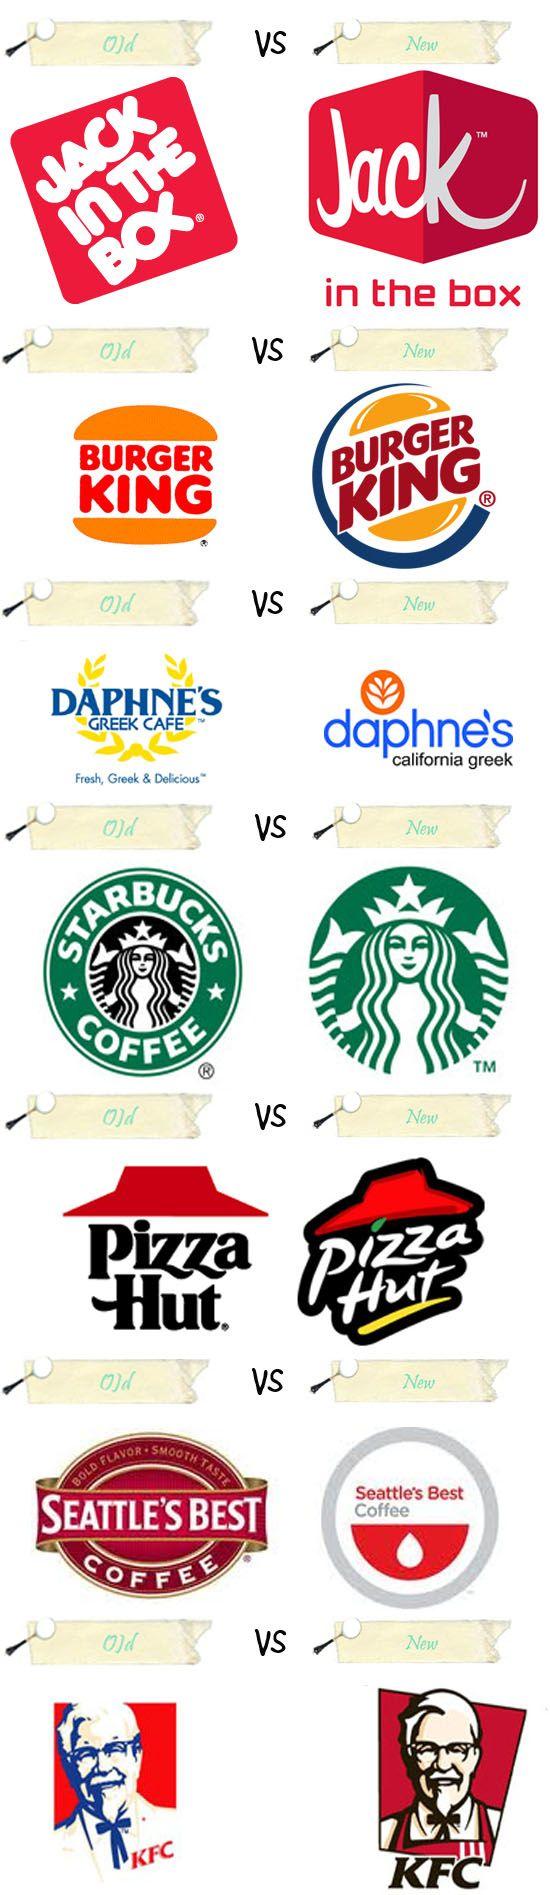 Popular Food Chains Logo - Fast Food Chains old vs new logos |